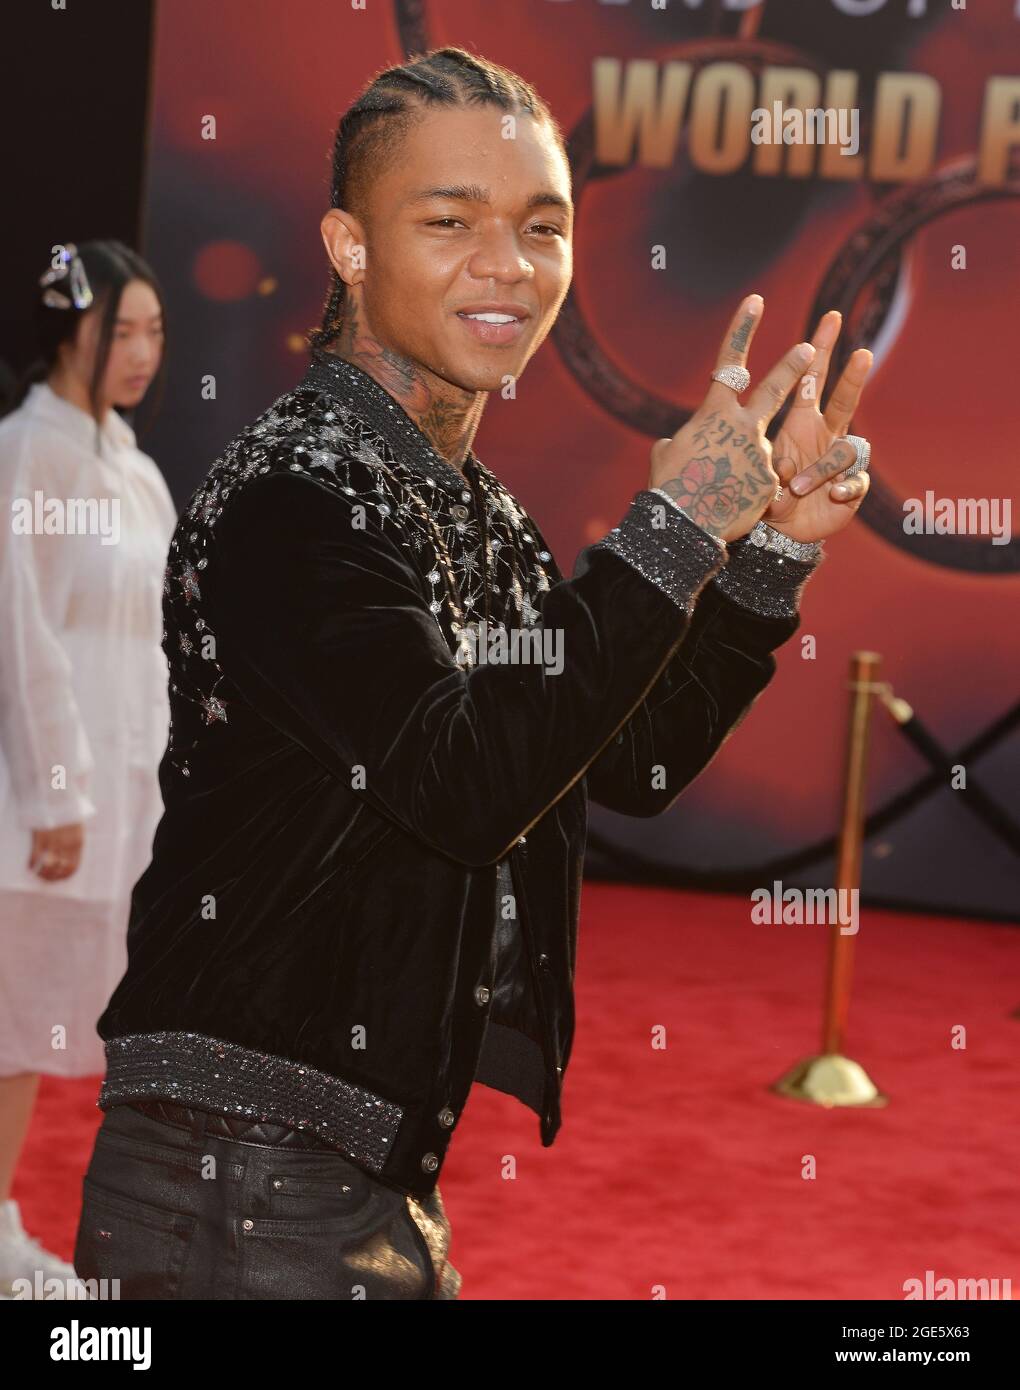 Los Angeles, USA. 17th Aug, 2021. Swae Lee 021 attends the Disney Marvel Premiere of Shang-Chi and the Legend of the Ten Rings at the El Capitan Theatre in Los Angeles. August 16, 2021. Credit: Tsuni/USA/Alamy Live News Stock Photo